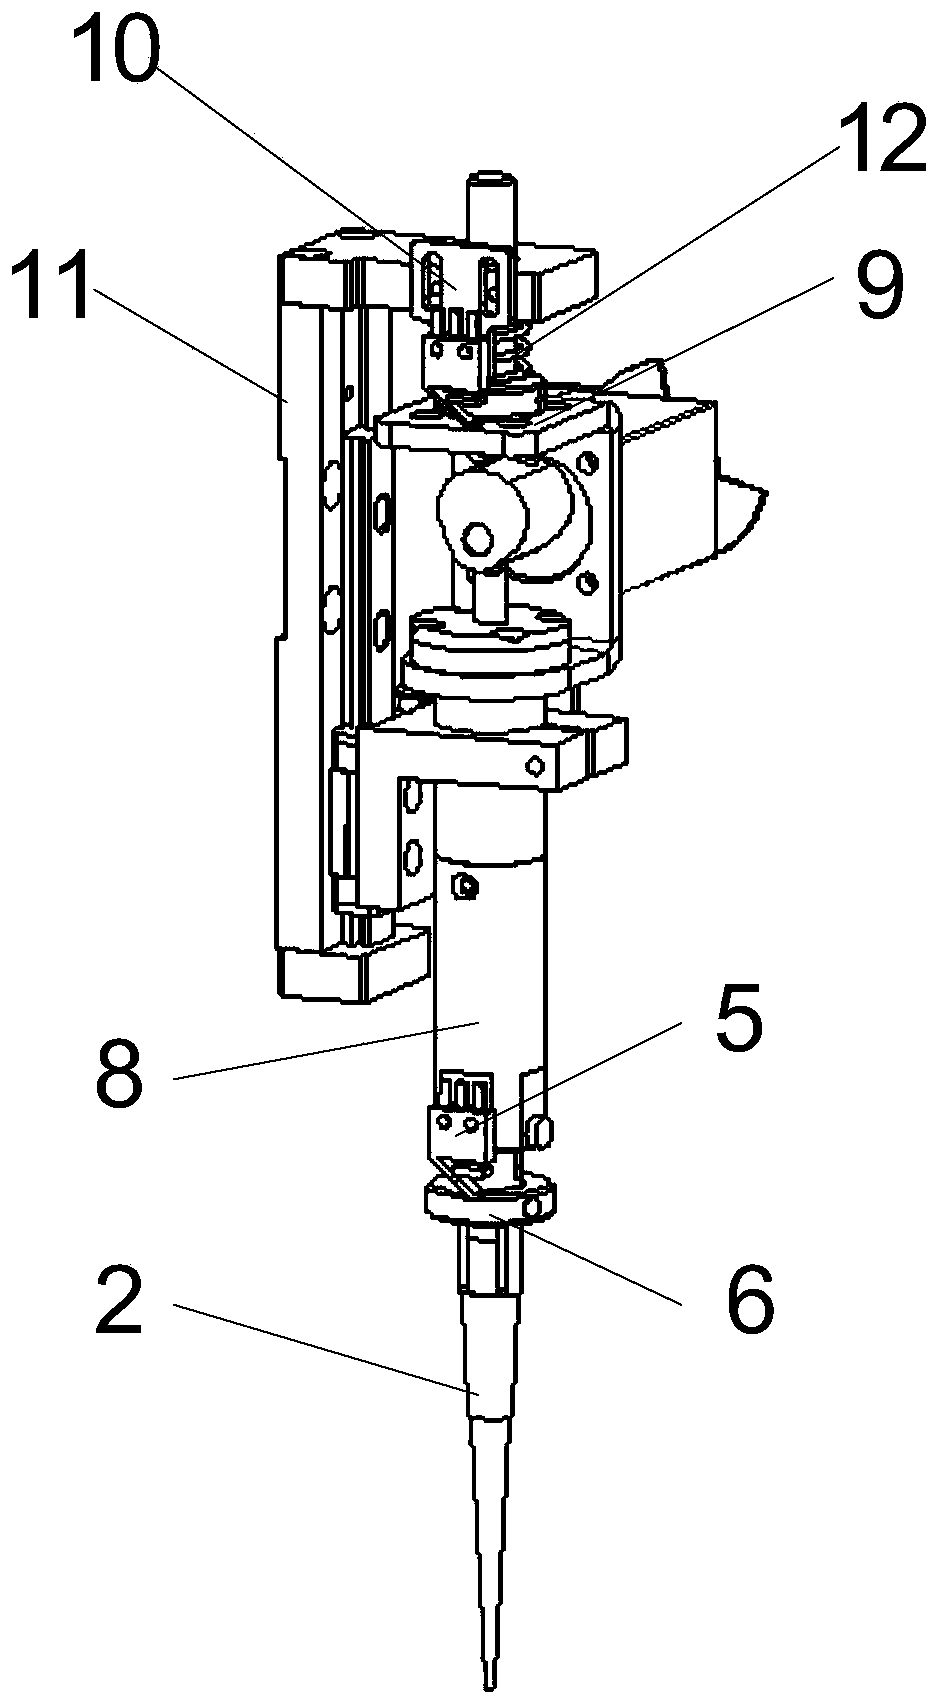 Sample sucking and spotting device